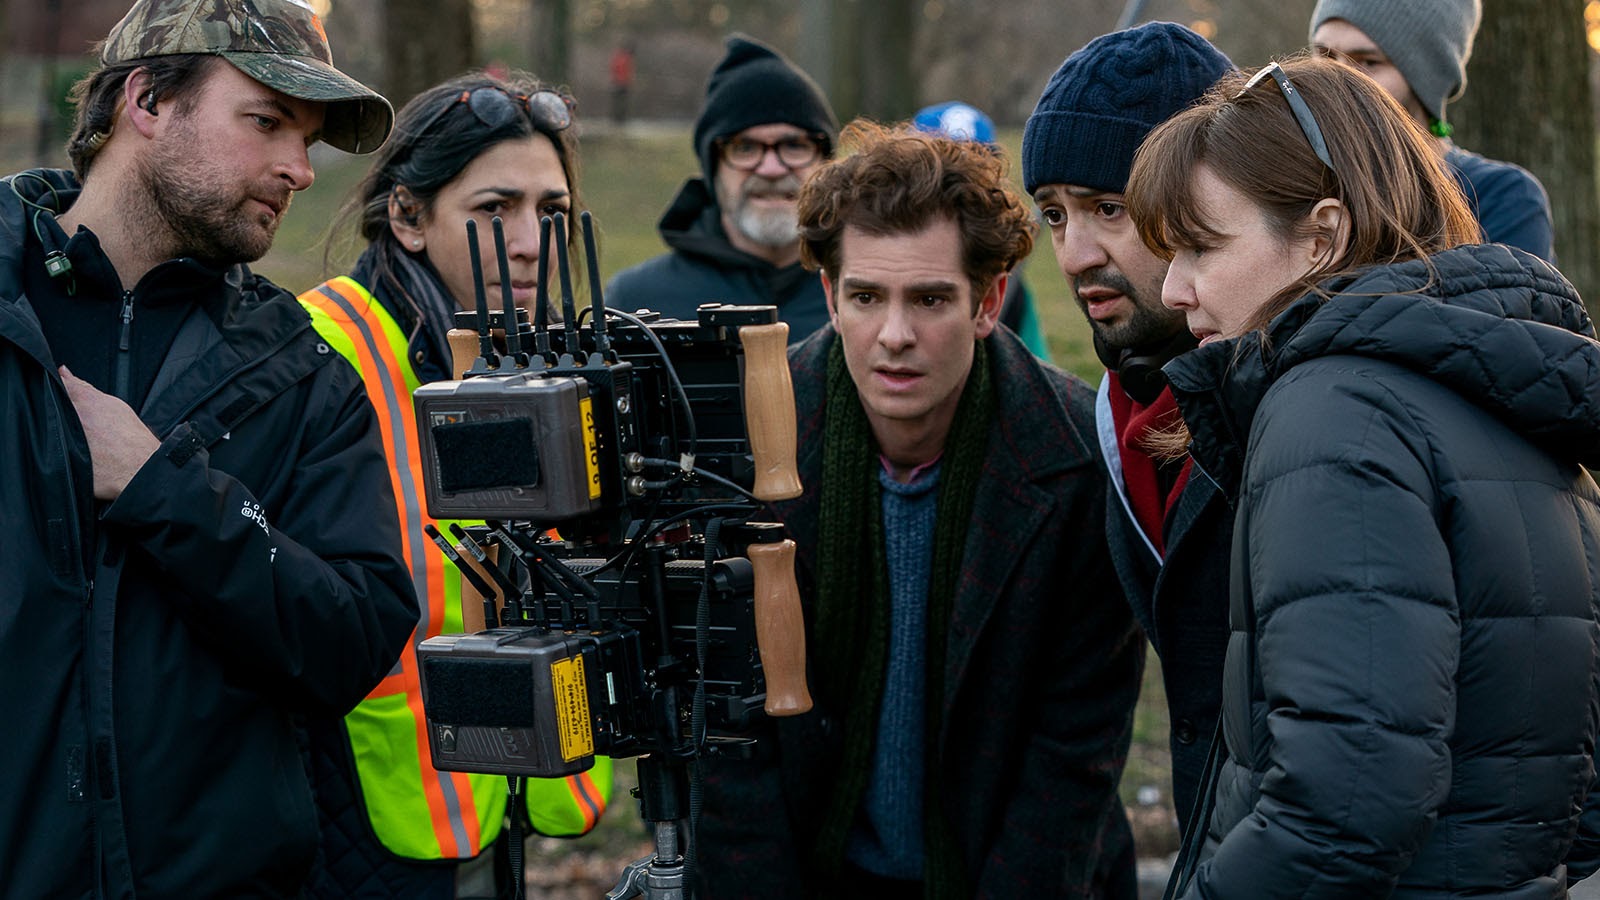 Lin Manuel Miranda, Alice Brooks (right), and Andrew Garfield crowd the monitor during filming for tick, tick...Boom!. Image © Warner Bros